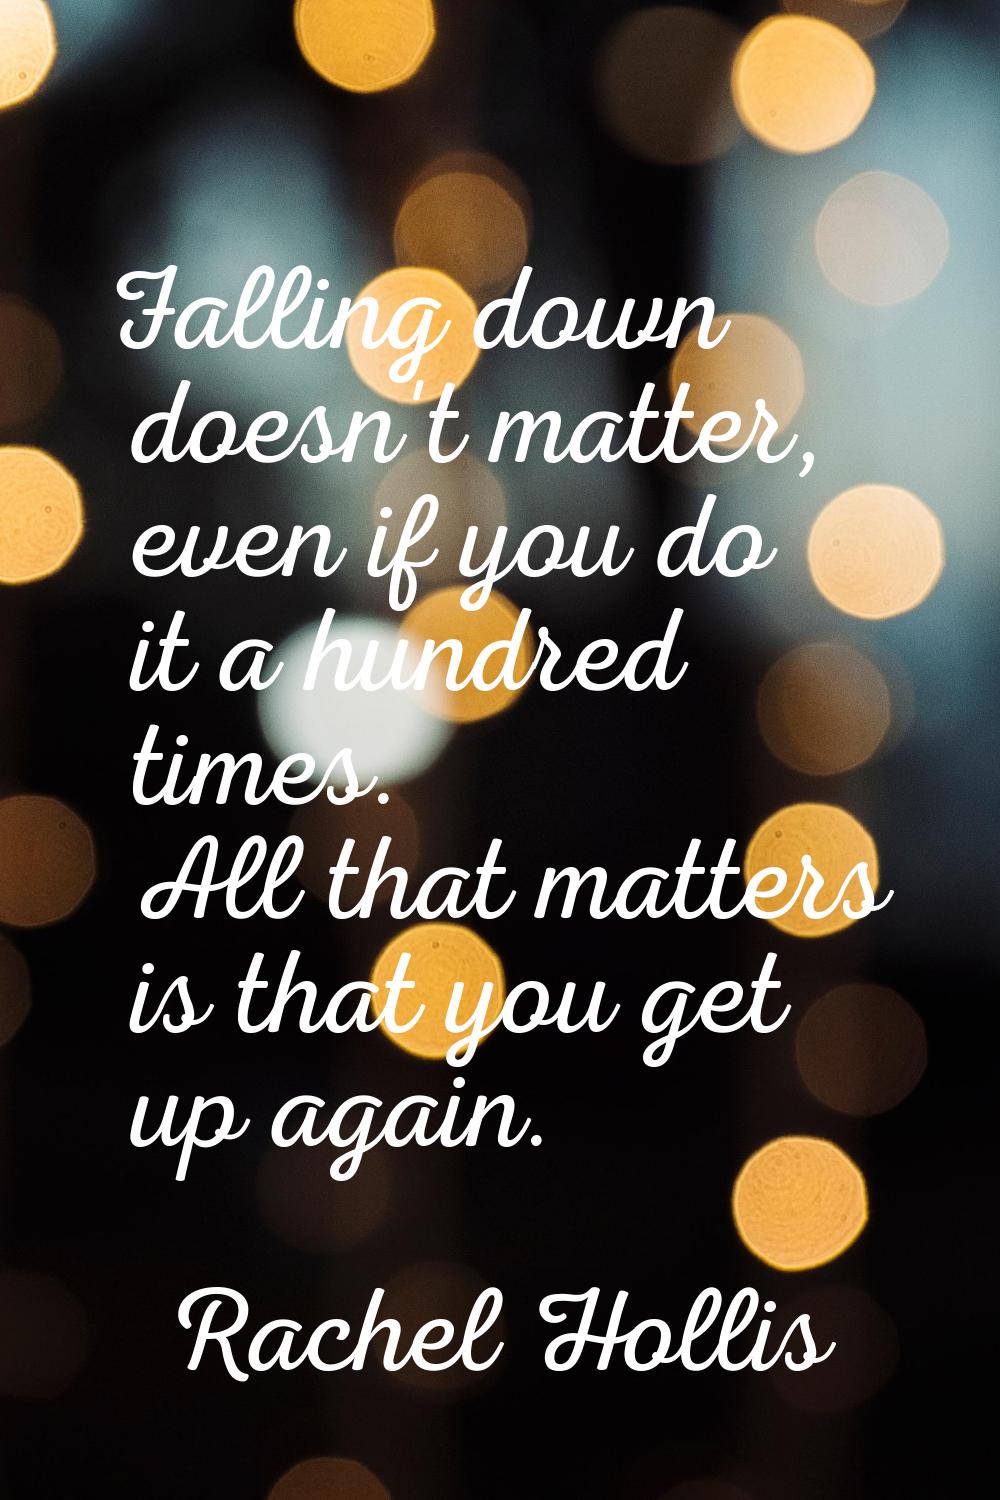 Falling down doesn't matter, even if you do it a hundred times. All that matters is that you get up